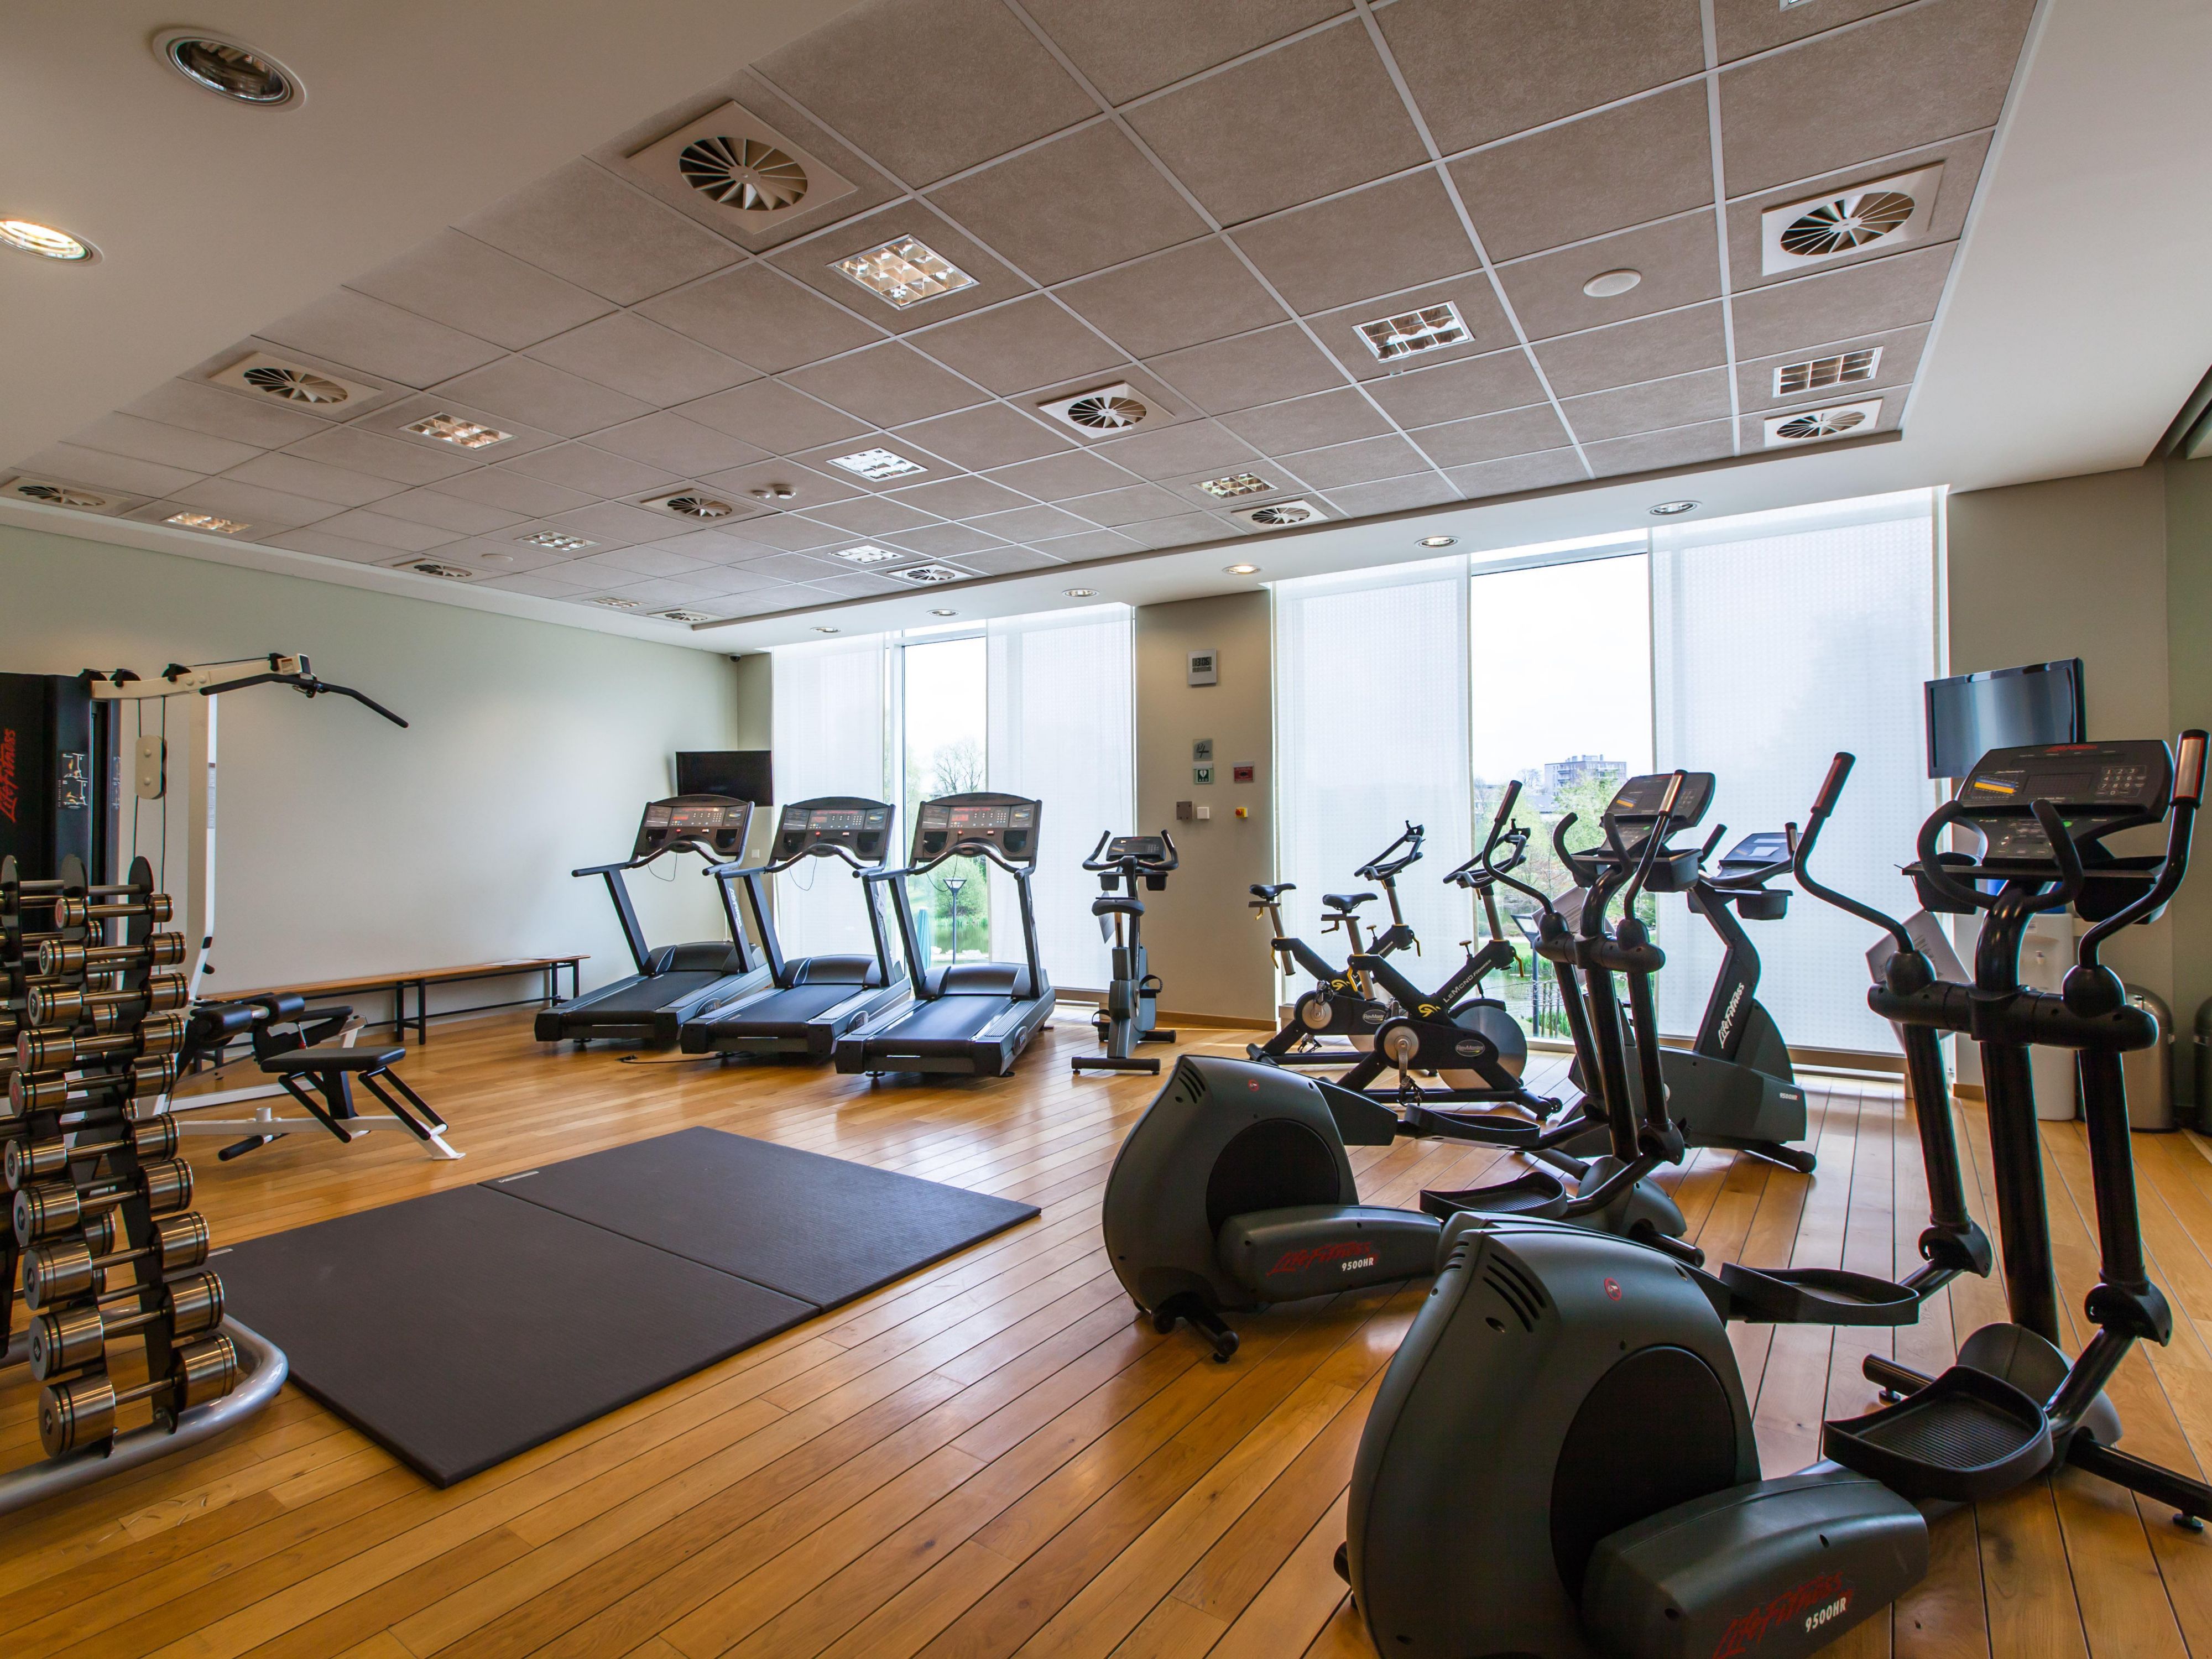 Rejuvenate body and mind at our Health & Leisure Center on the ground floor. Our 24-hour fitness centre features a treadmill, stationary bikes, ellipticals, multi-station training equipment, free weights, and a jogging track. After a workout, relax in our women’s and men’s saunas and steam rooms.